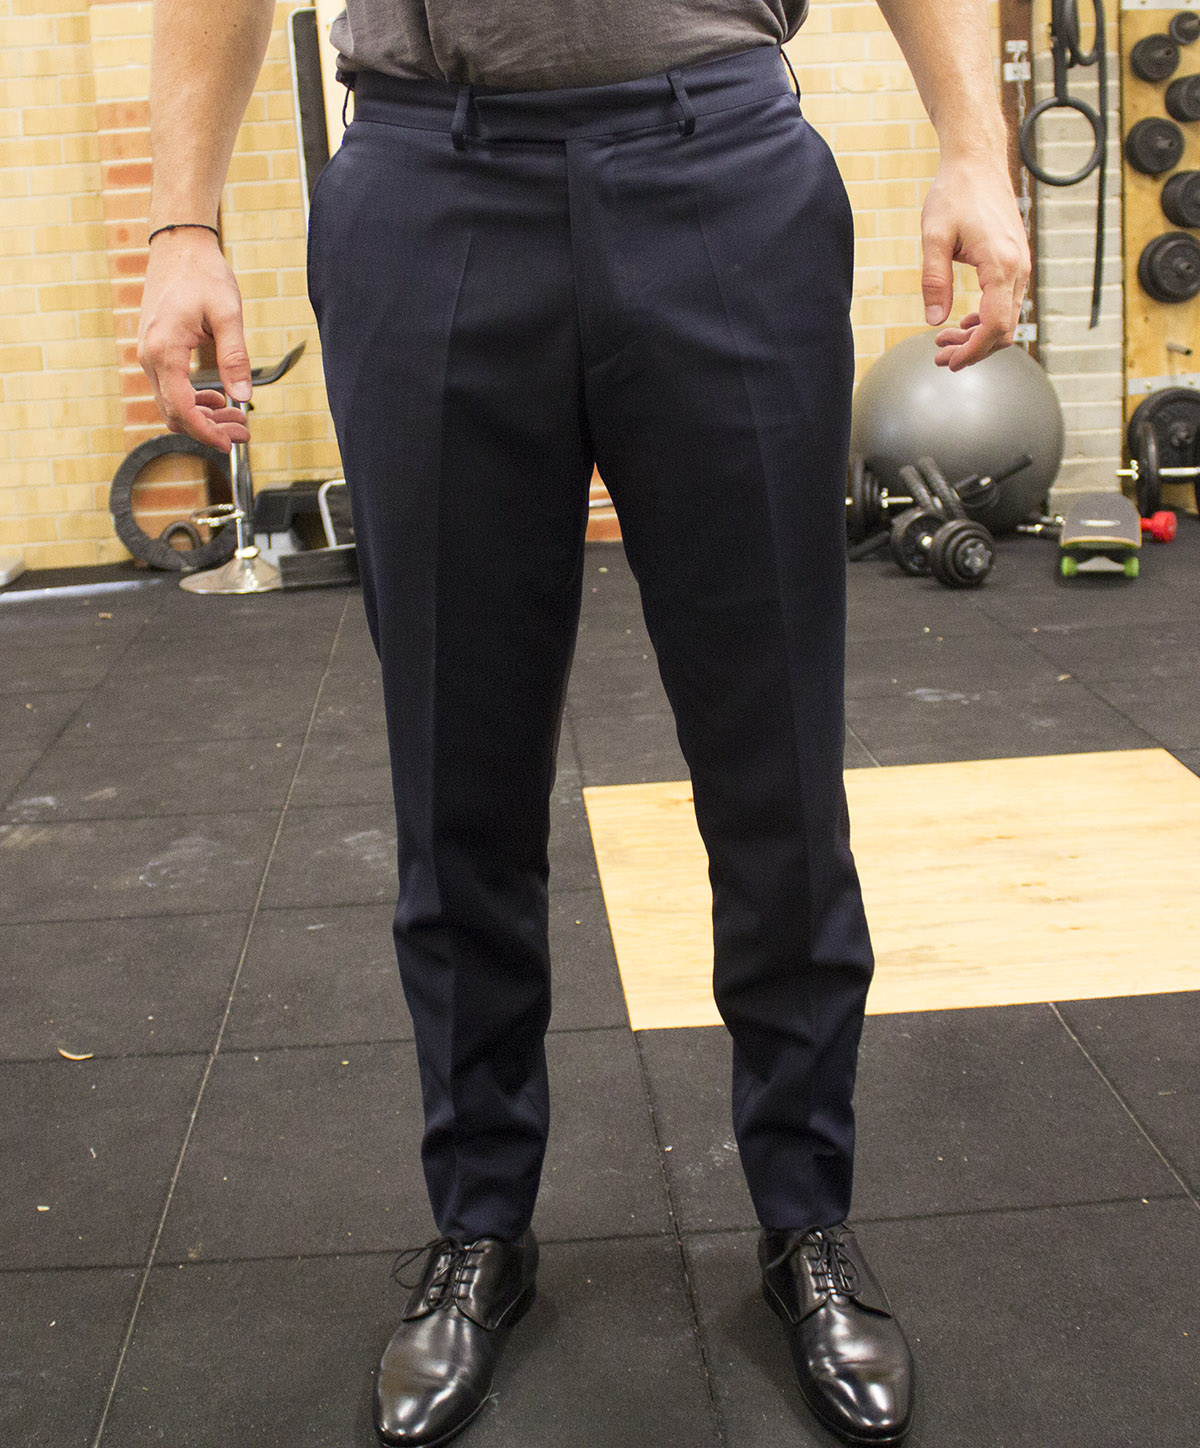 getting suit pants tapered